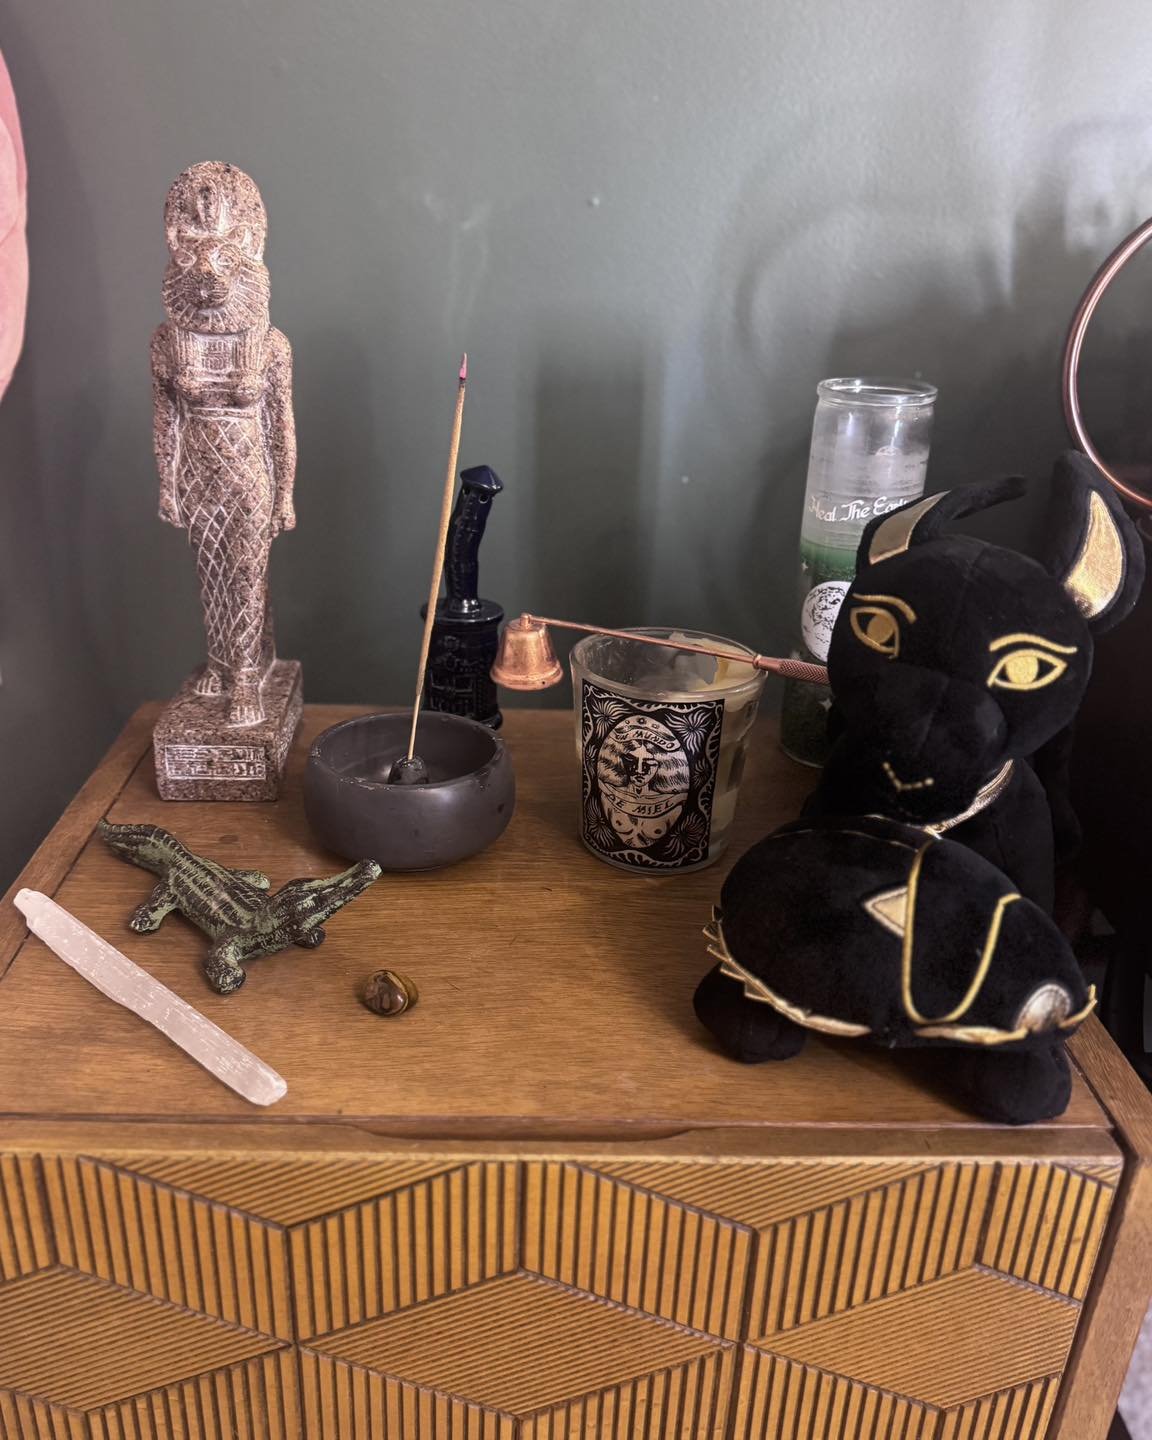 Christine&rsquo;s current altar setup complete with Sekhmet statue and Anubis plush! 

&bull;
&bull;
&bull;
Image description: A small altar setup with a statue of Sekhmet, a small alligator statue, some incense burning, a couple candles and an Anubi